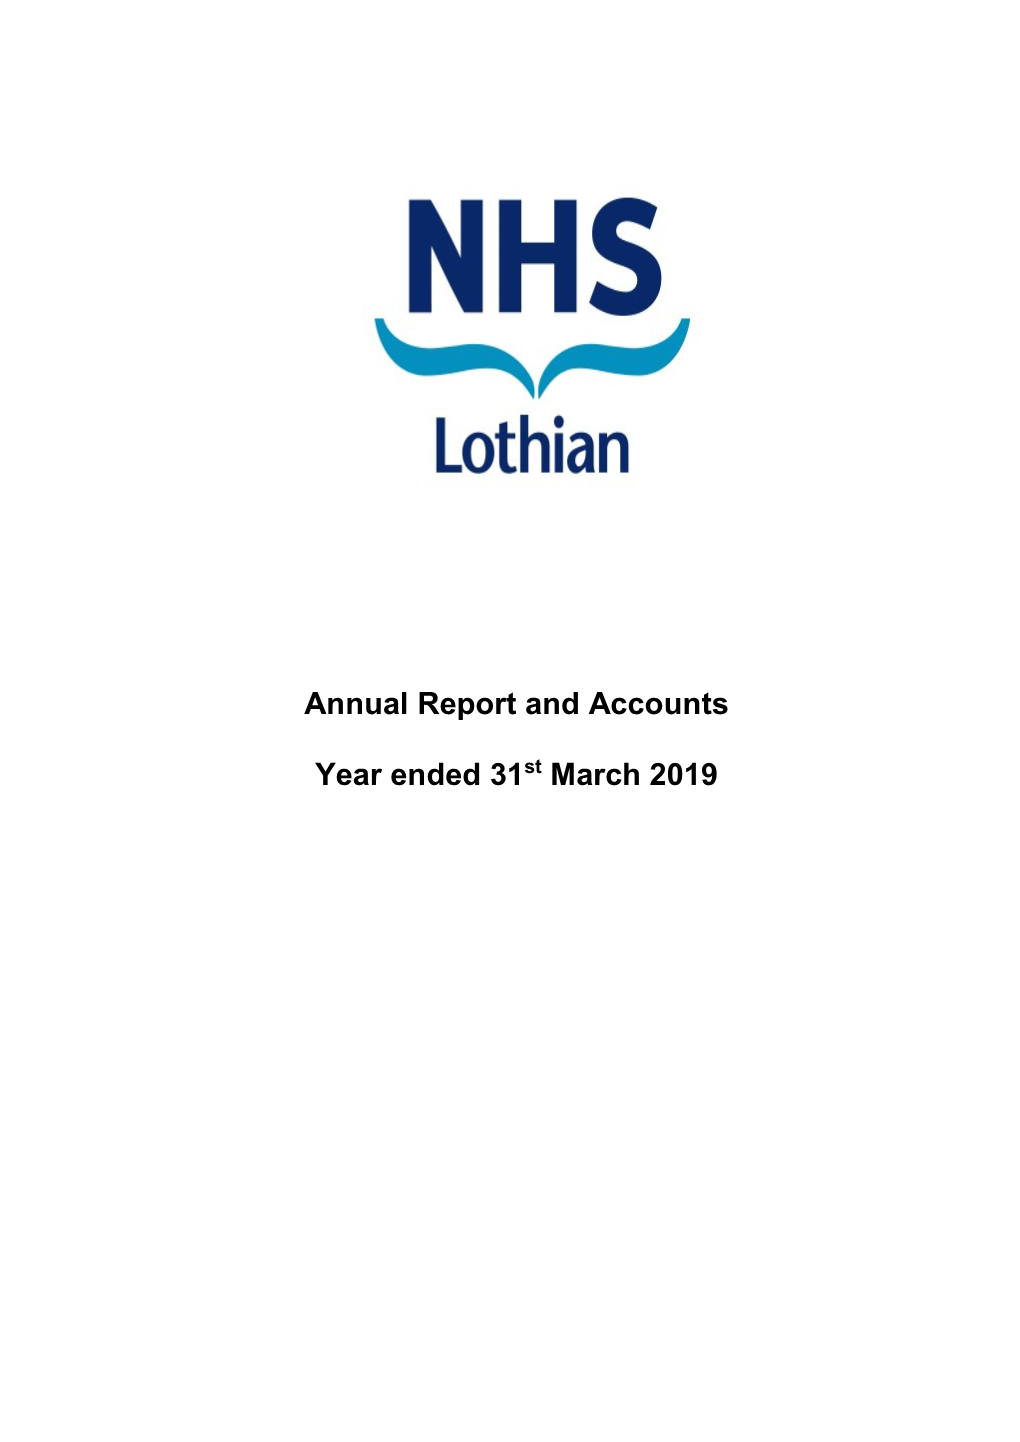 Annual Report and Accounts Year Ended 31St March 2019